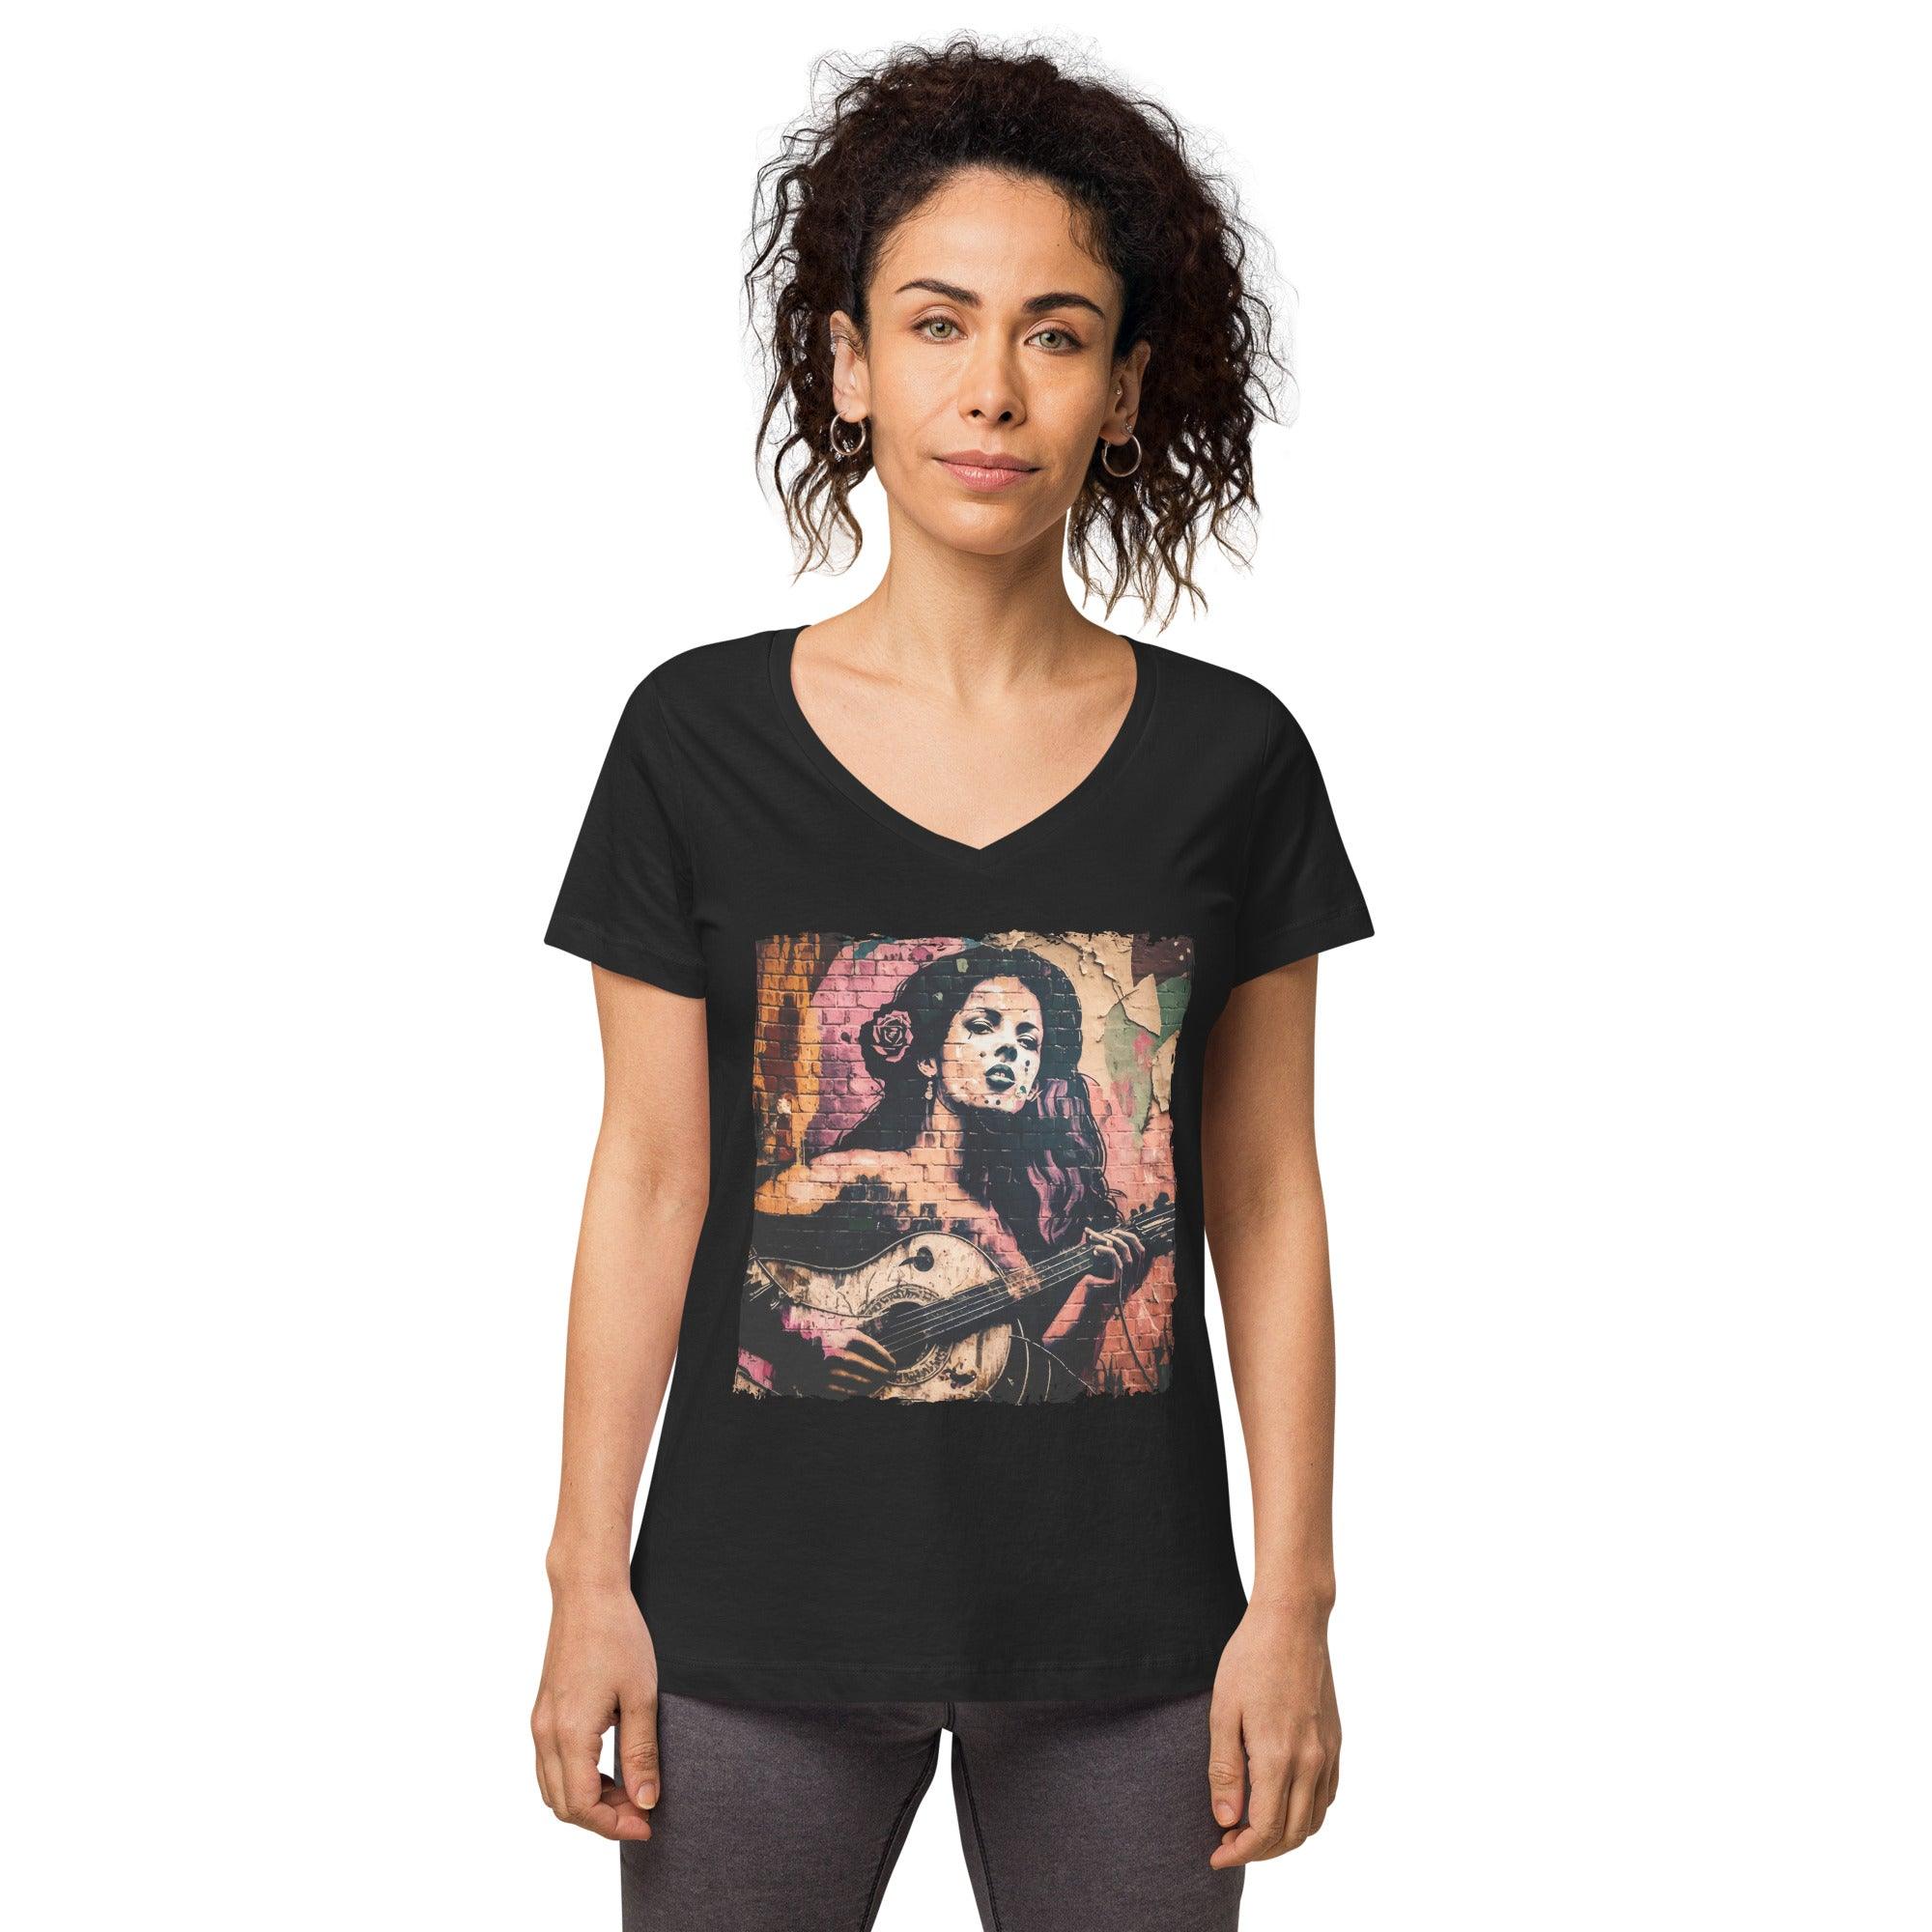 Setting The Mood Right Women’s Fitted V-neck T-shirt - Beyond T-shirts